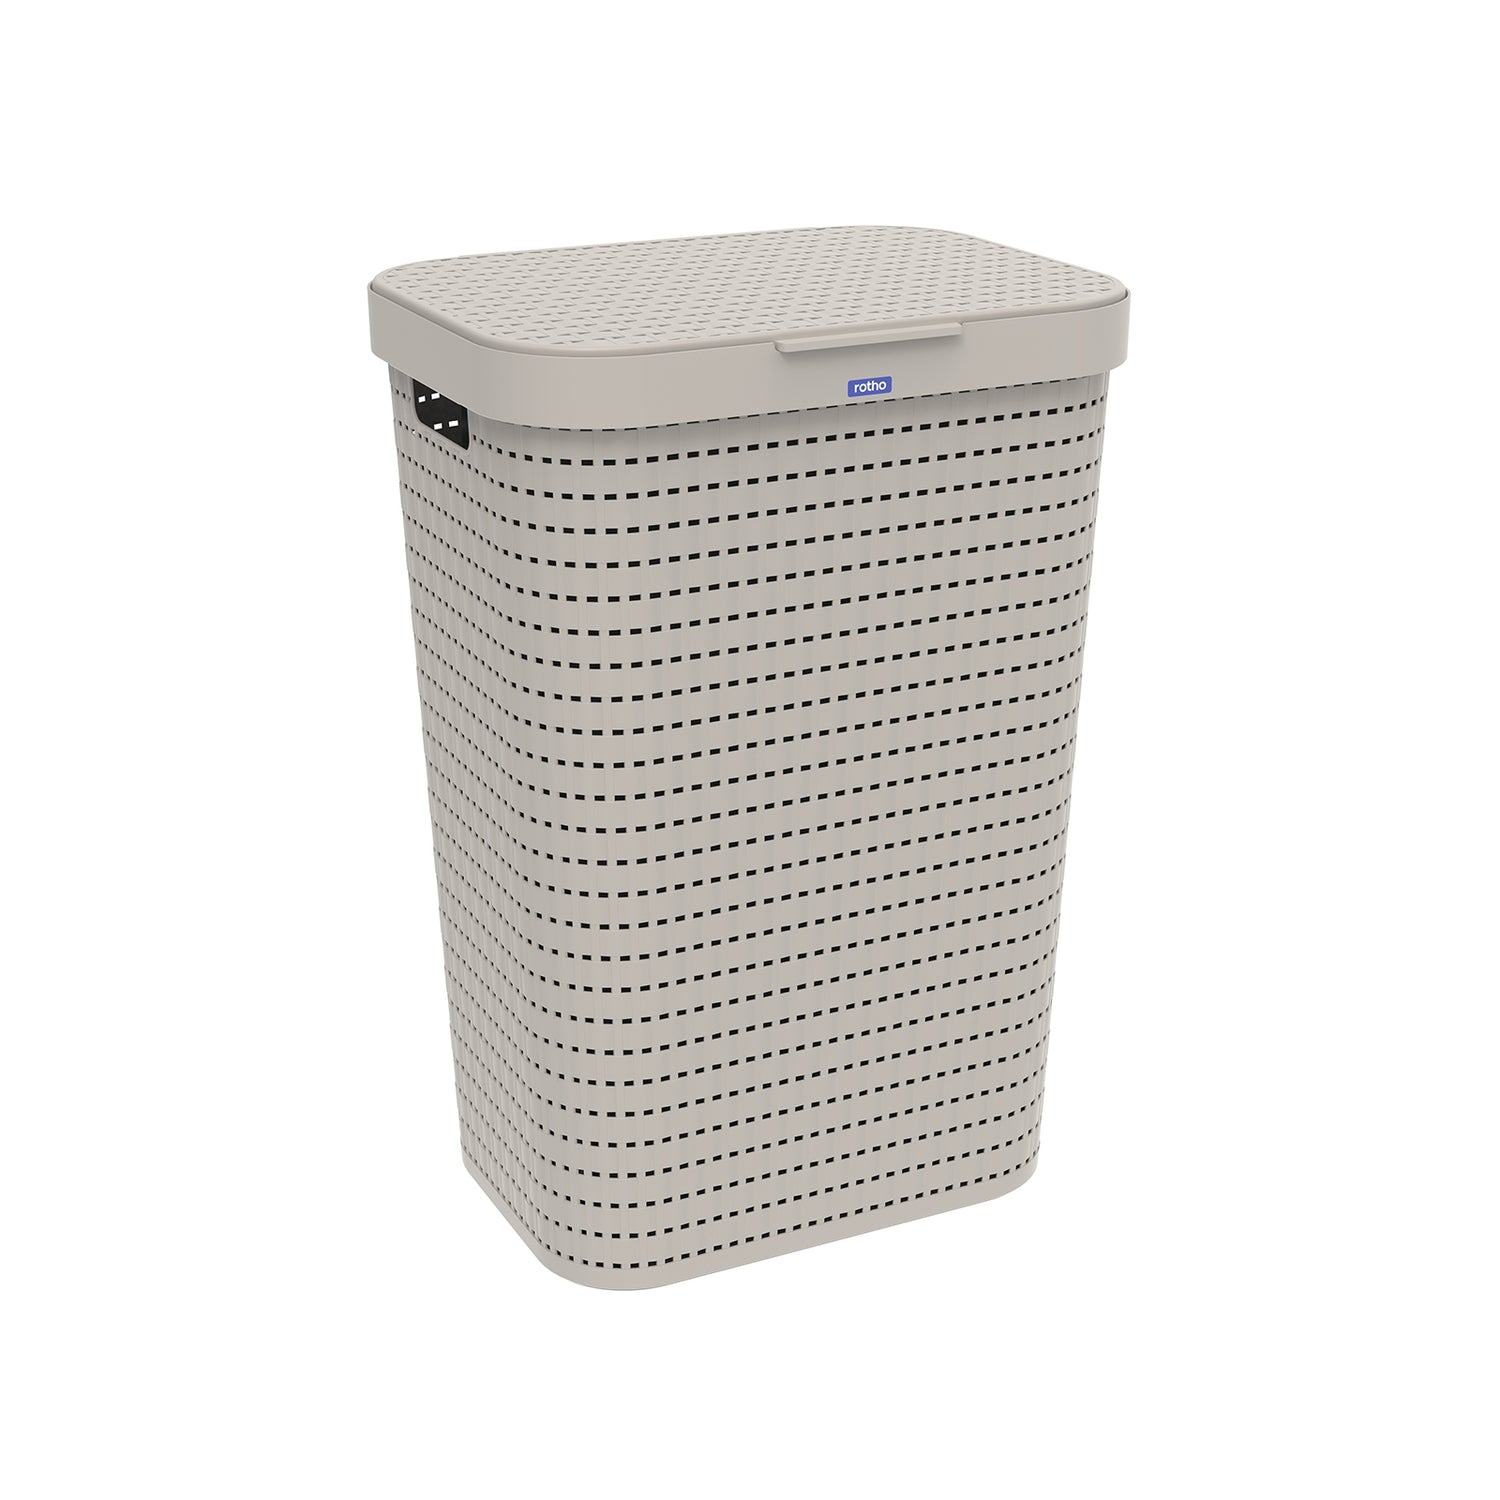 Laundry Basket 55L l COUNTRY